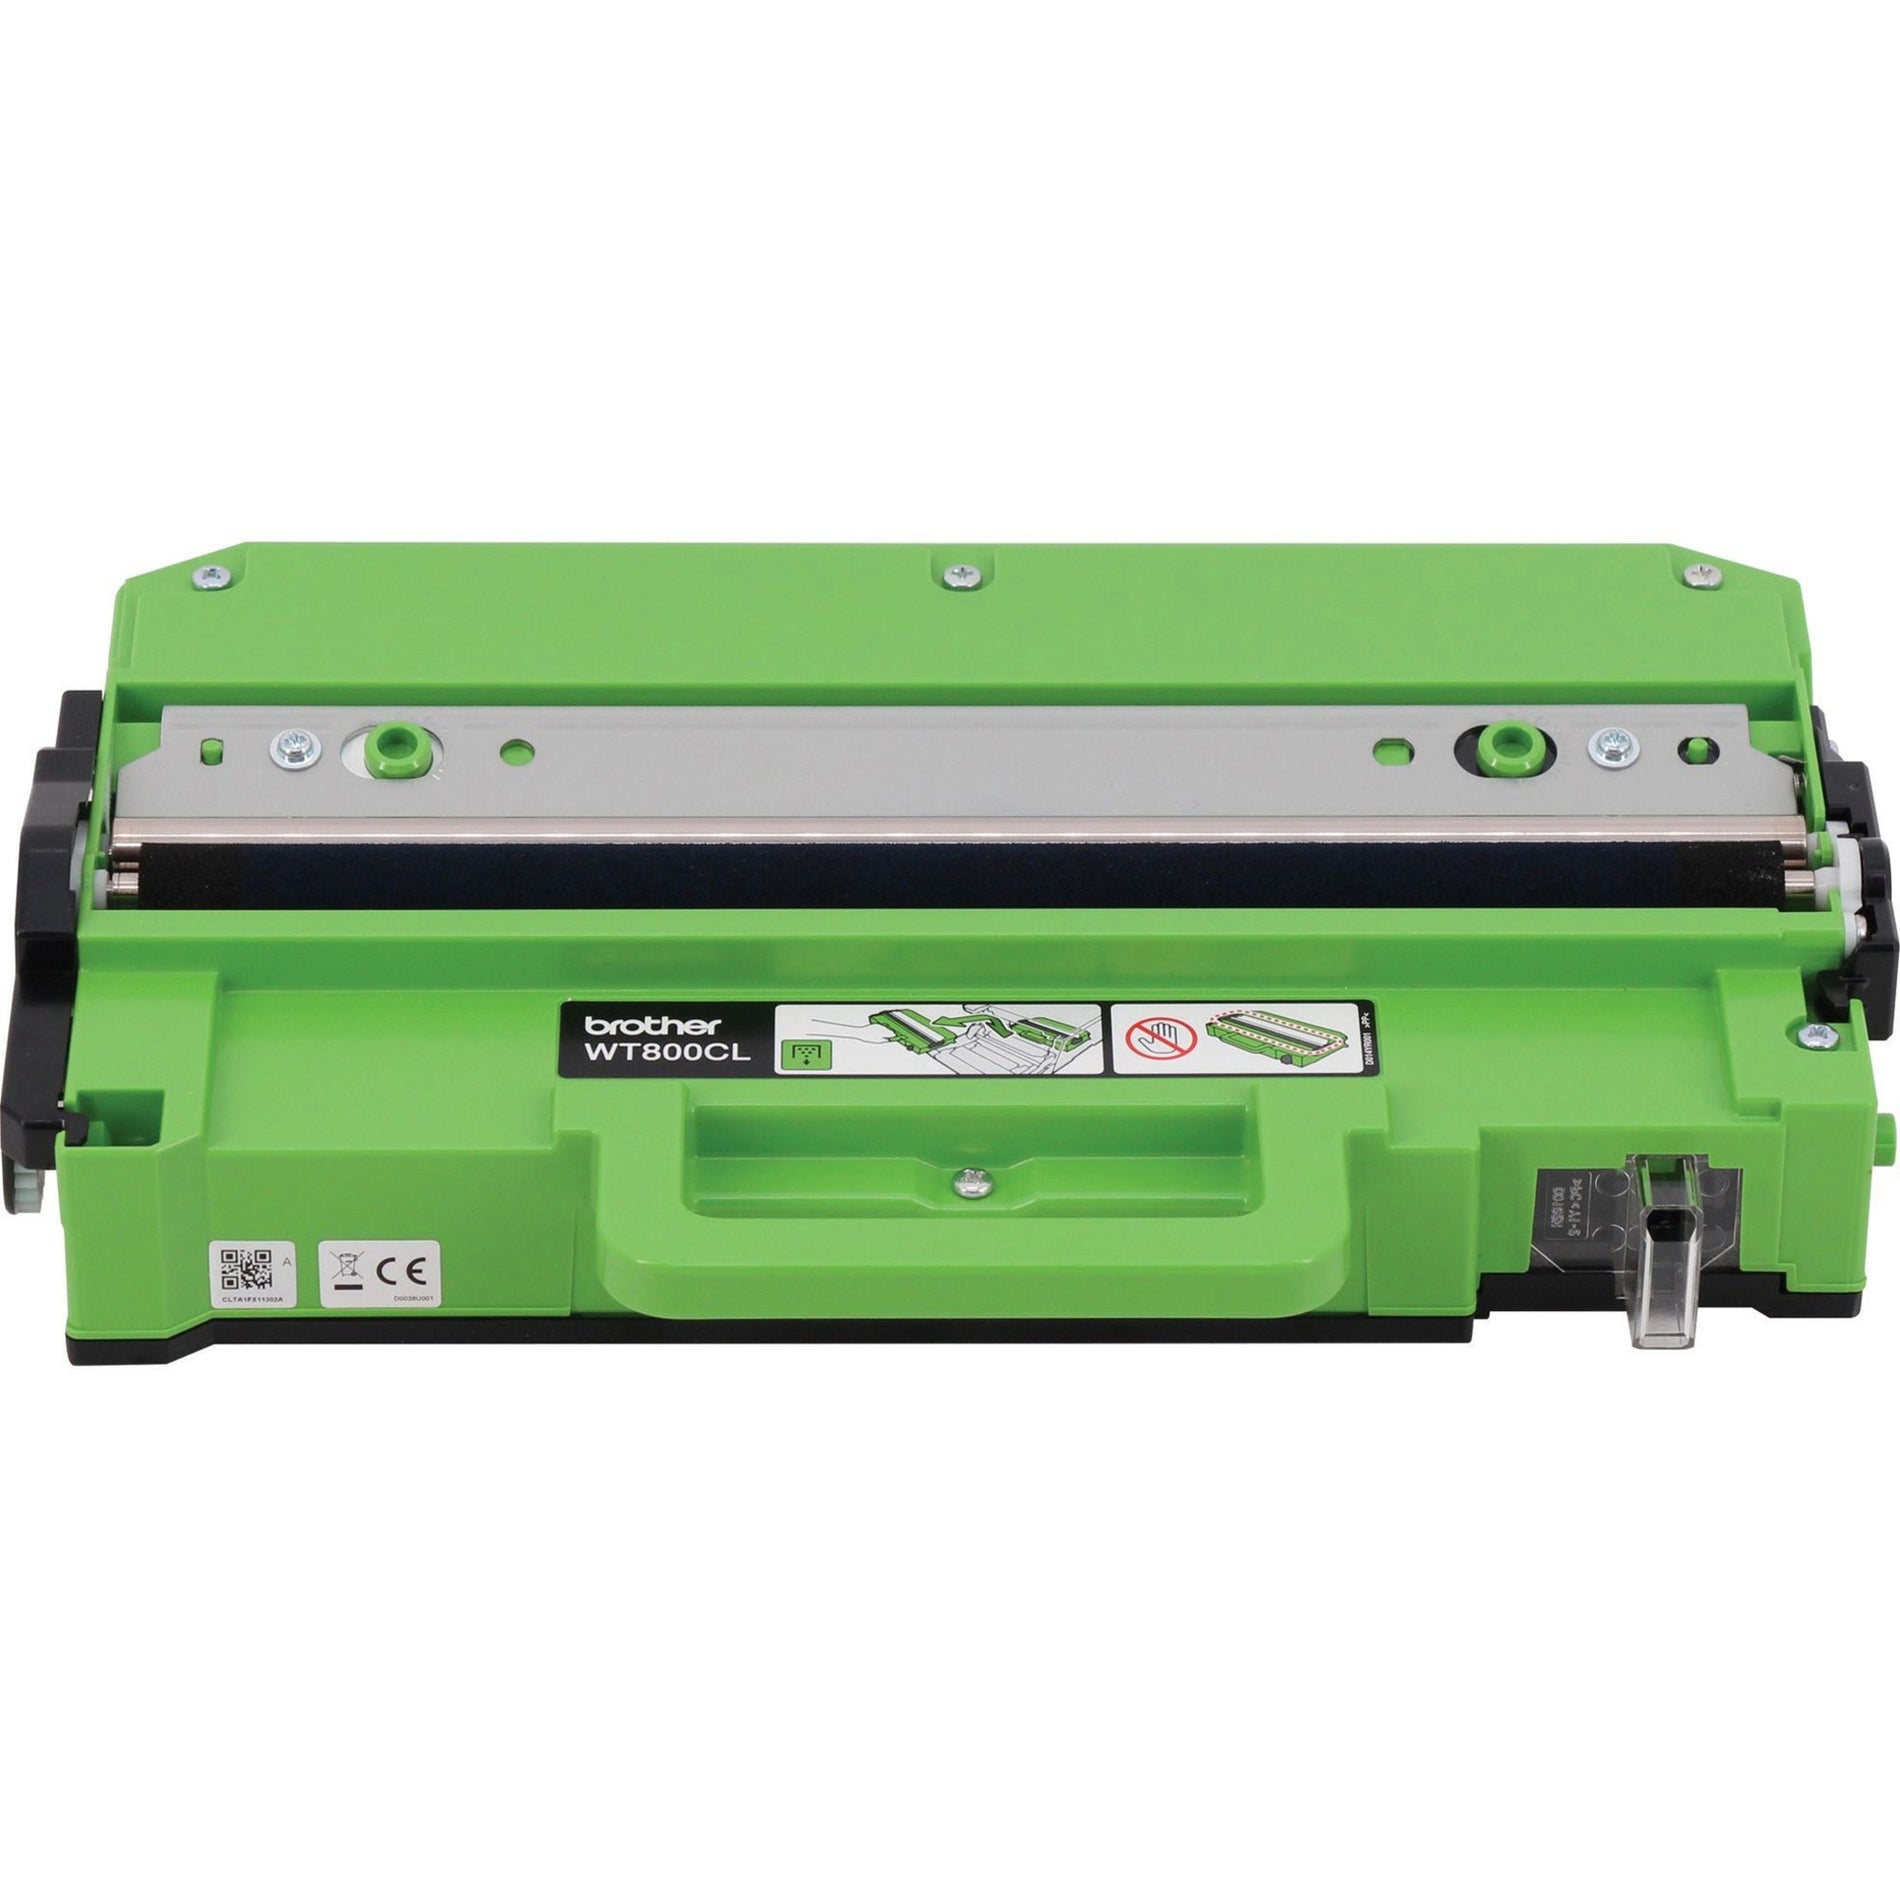 Brother WT800CL Waste Toner Unit - High Yield, Laser Printer Waste Collector